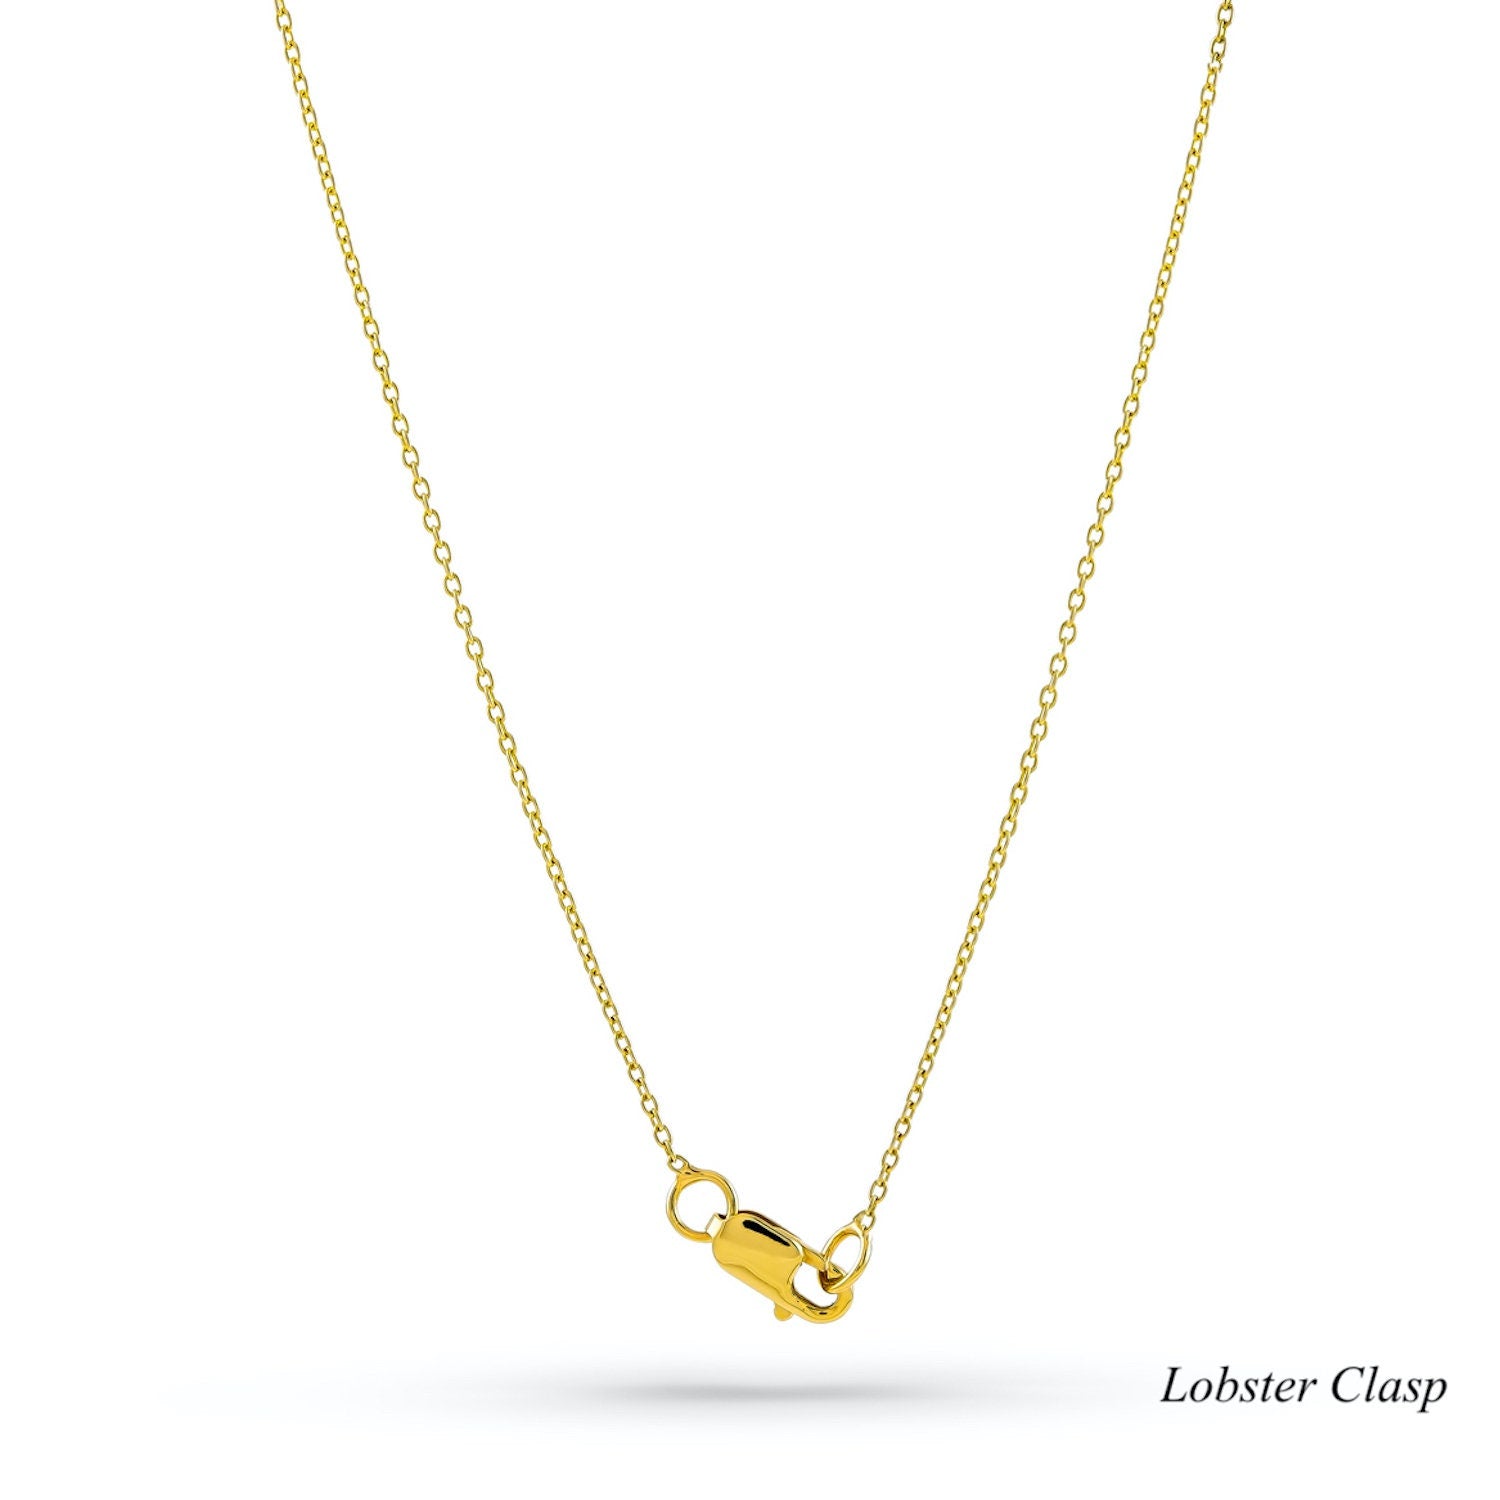 Diamond Circle Necklace With Dangling Bezel Charms in 14K Gold